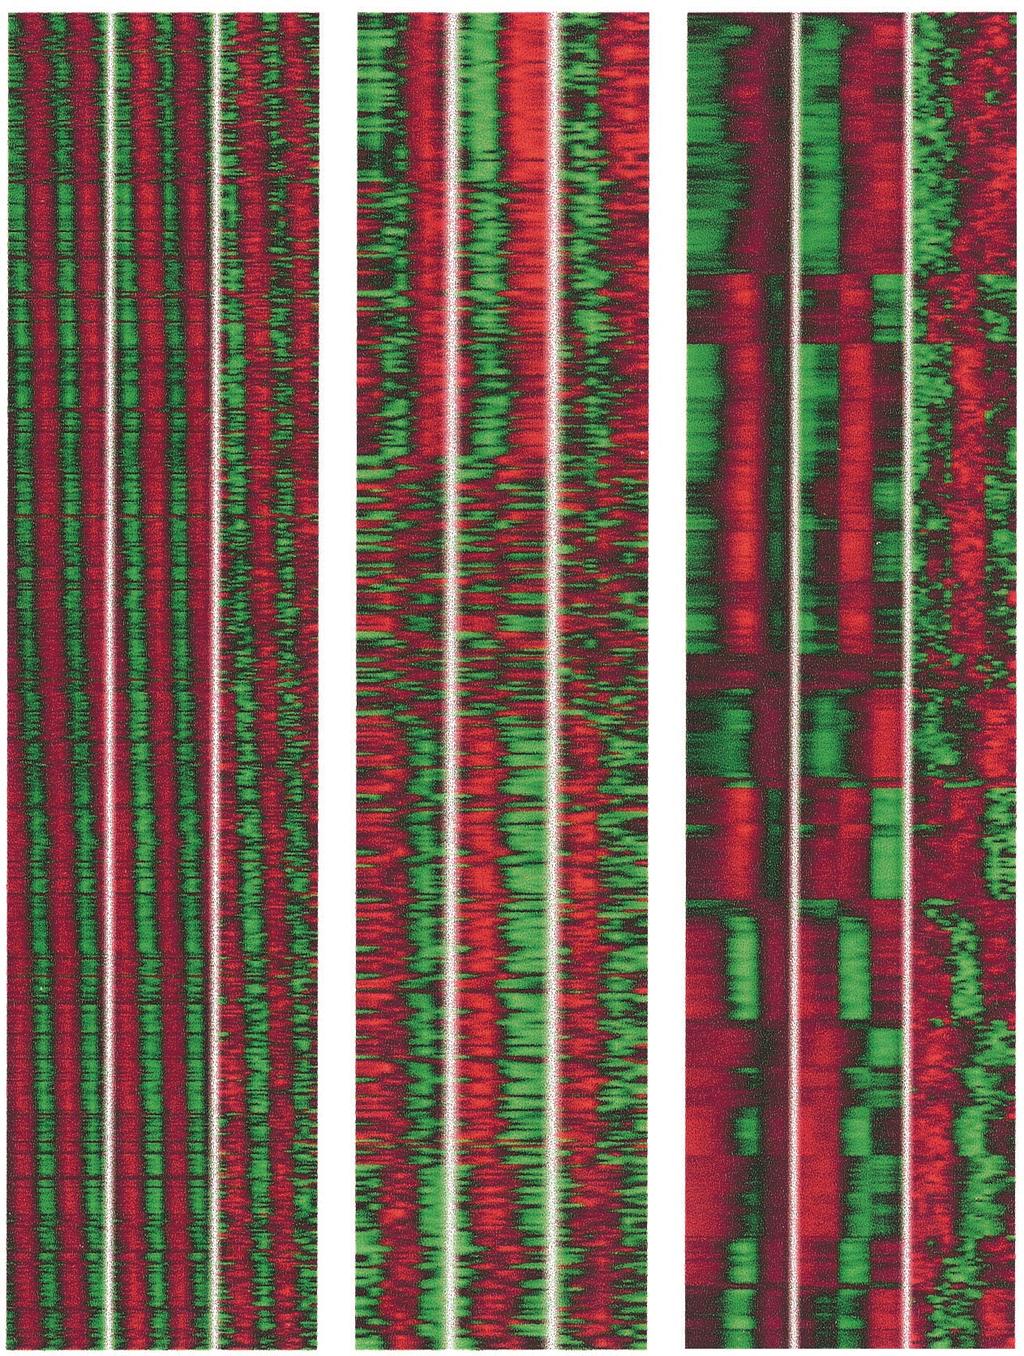 Fig. 3. A reconstruction of the expression profiles for the cdc15 (Left), sporulation (Center), and fibroblast (Right) data sets.